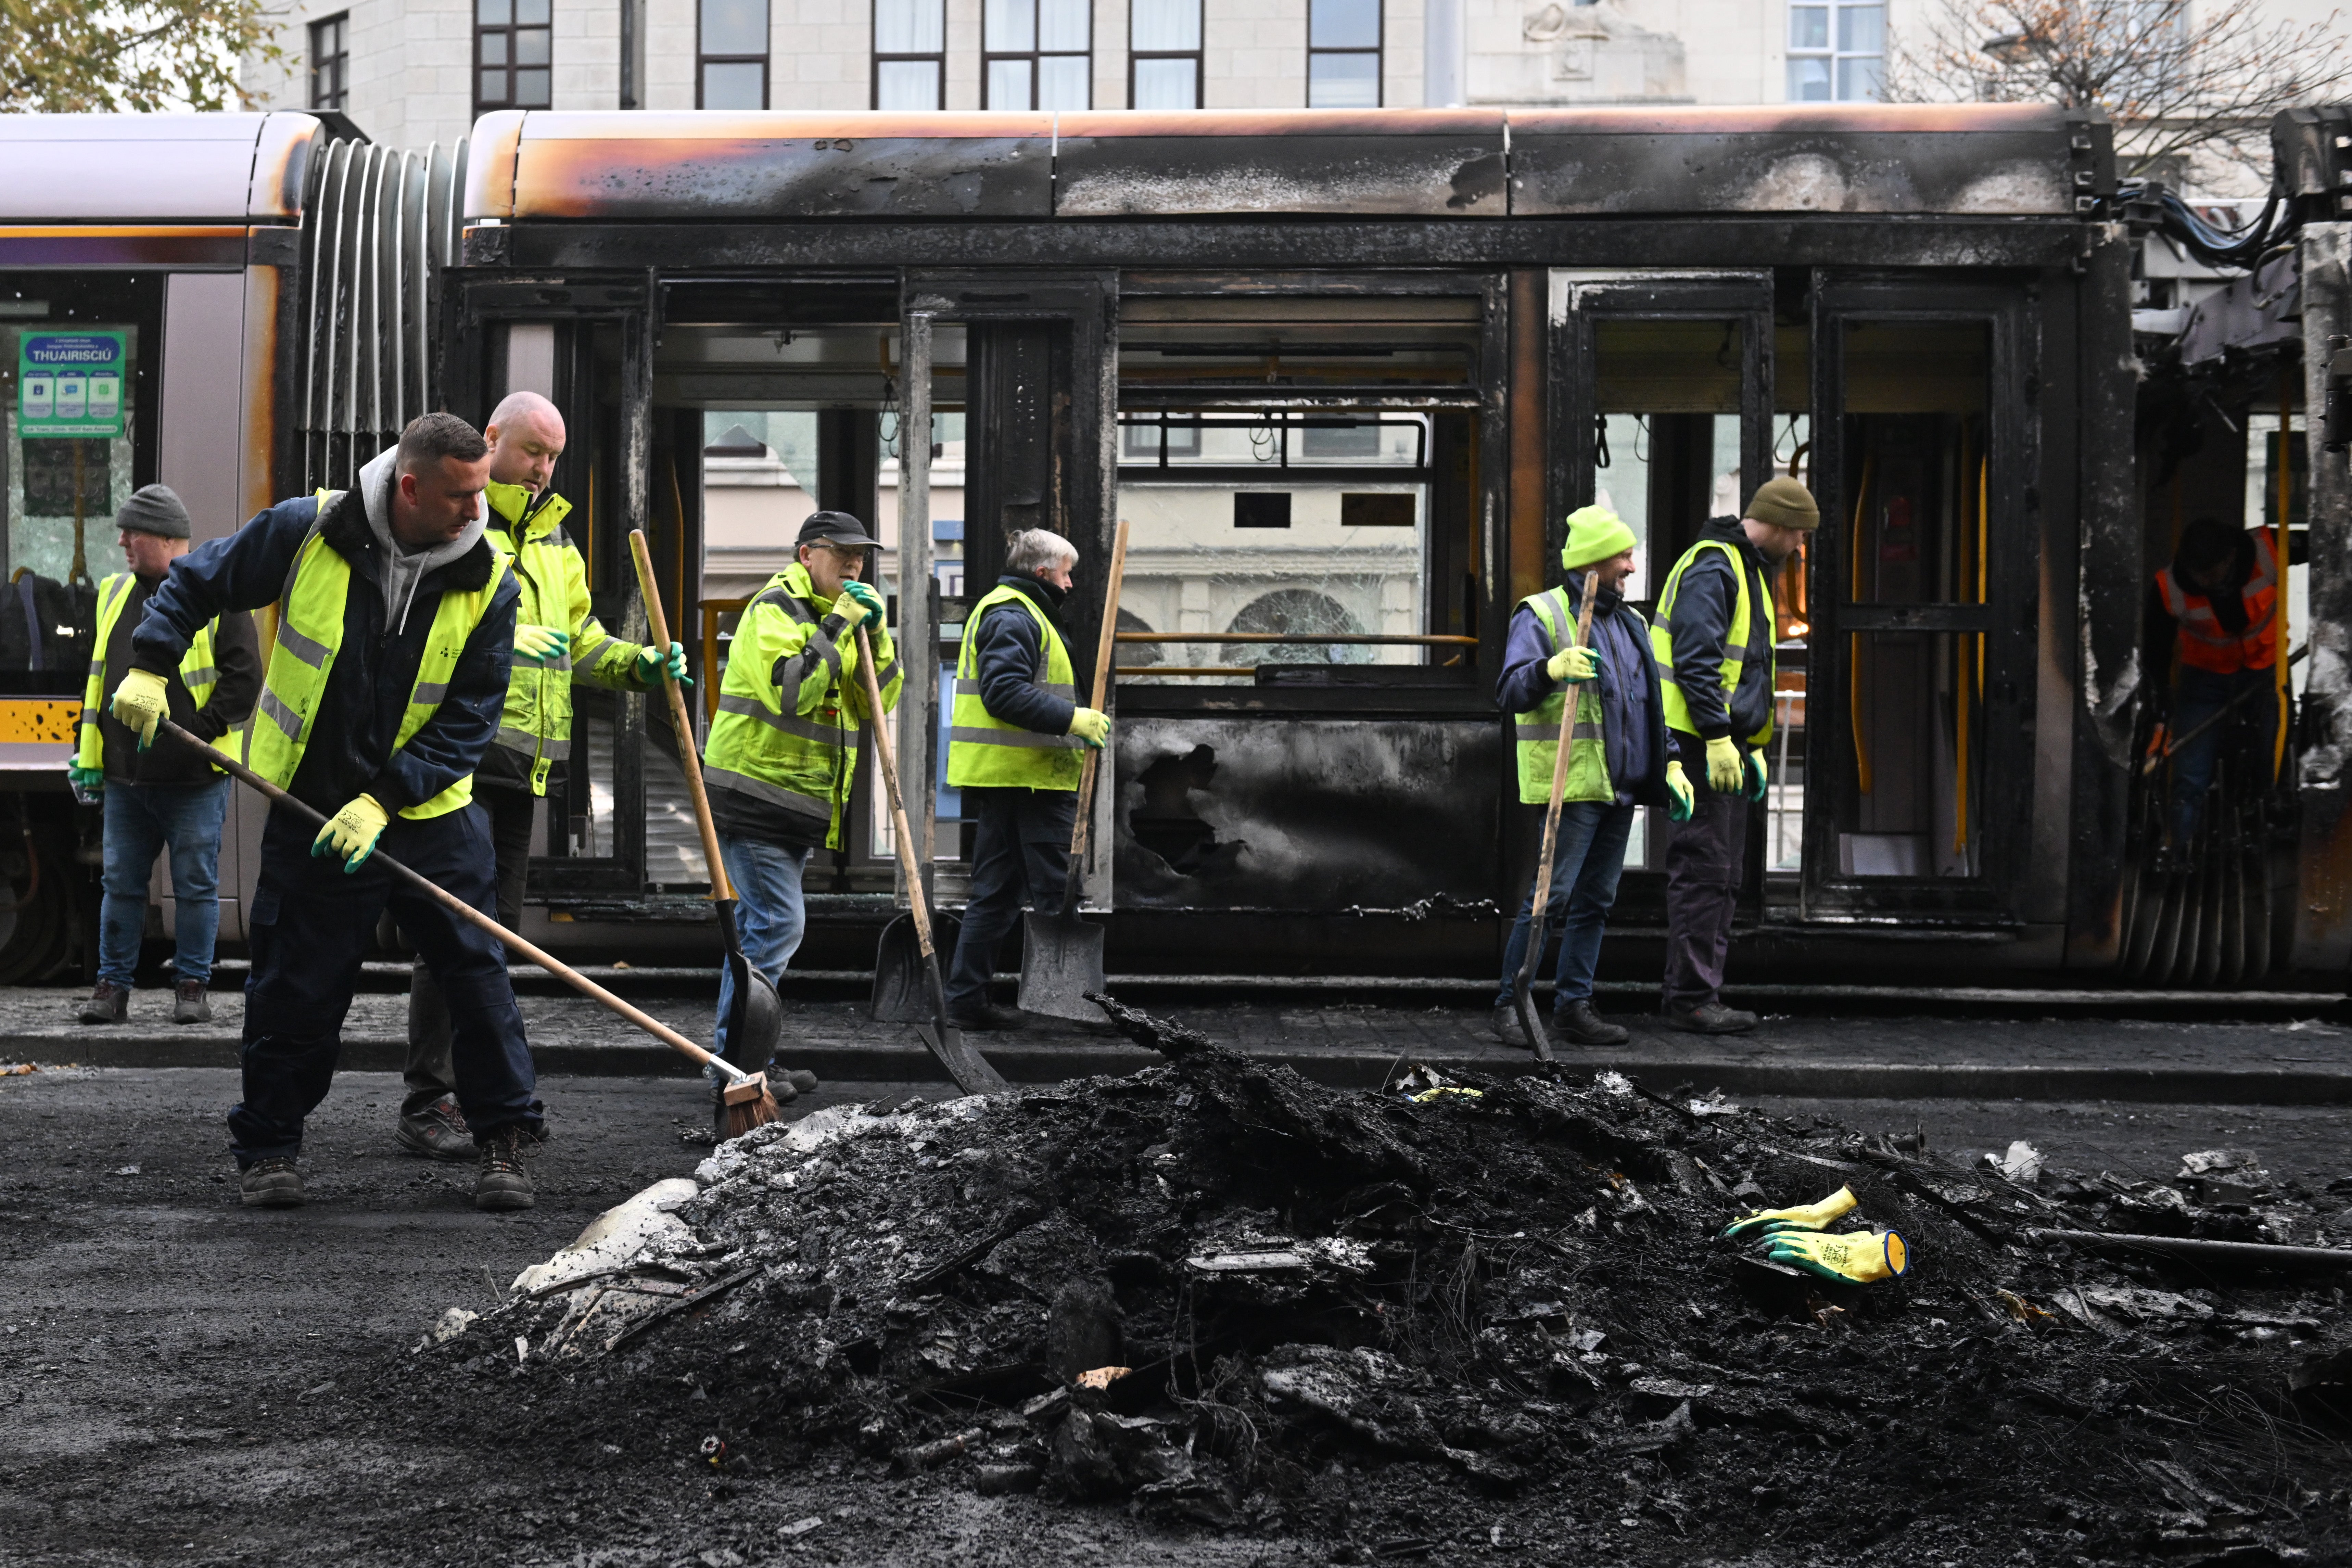 Workers clean up the debris of a burnt train on Friday in the wake of the riots in Dublin, Ireland